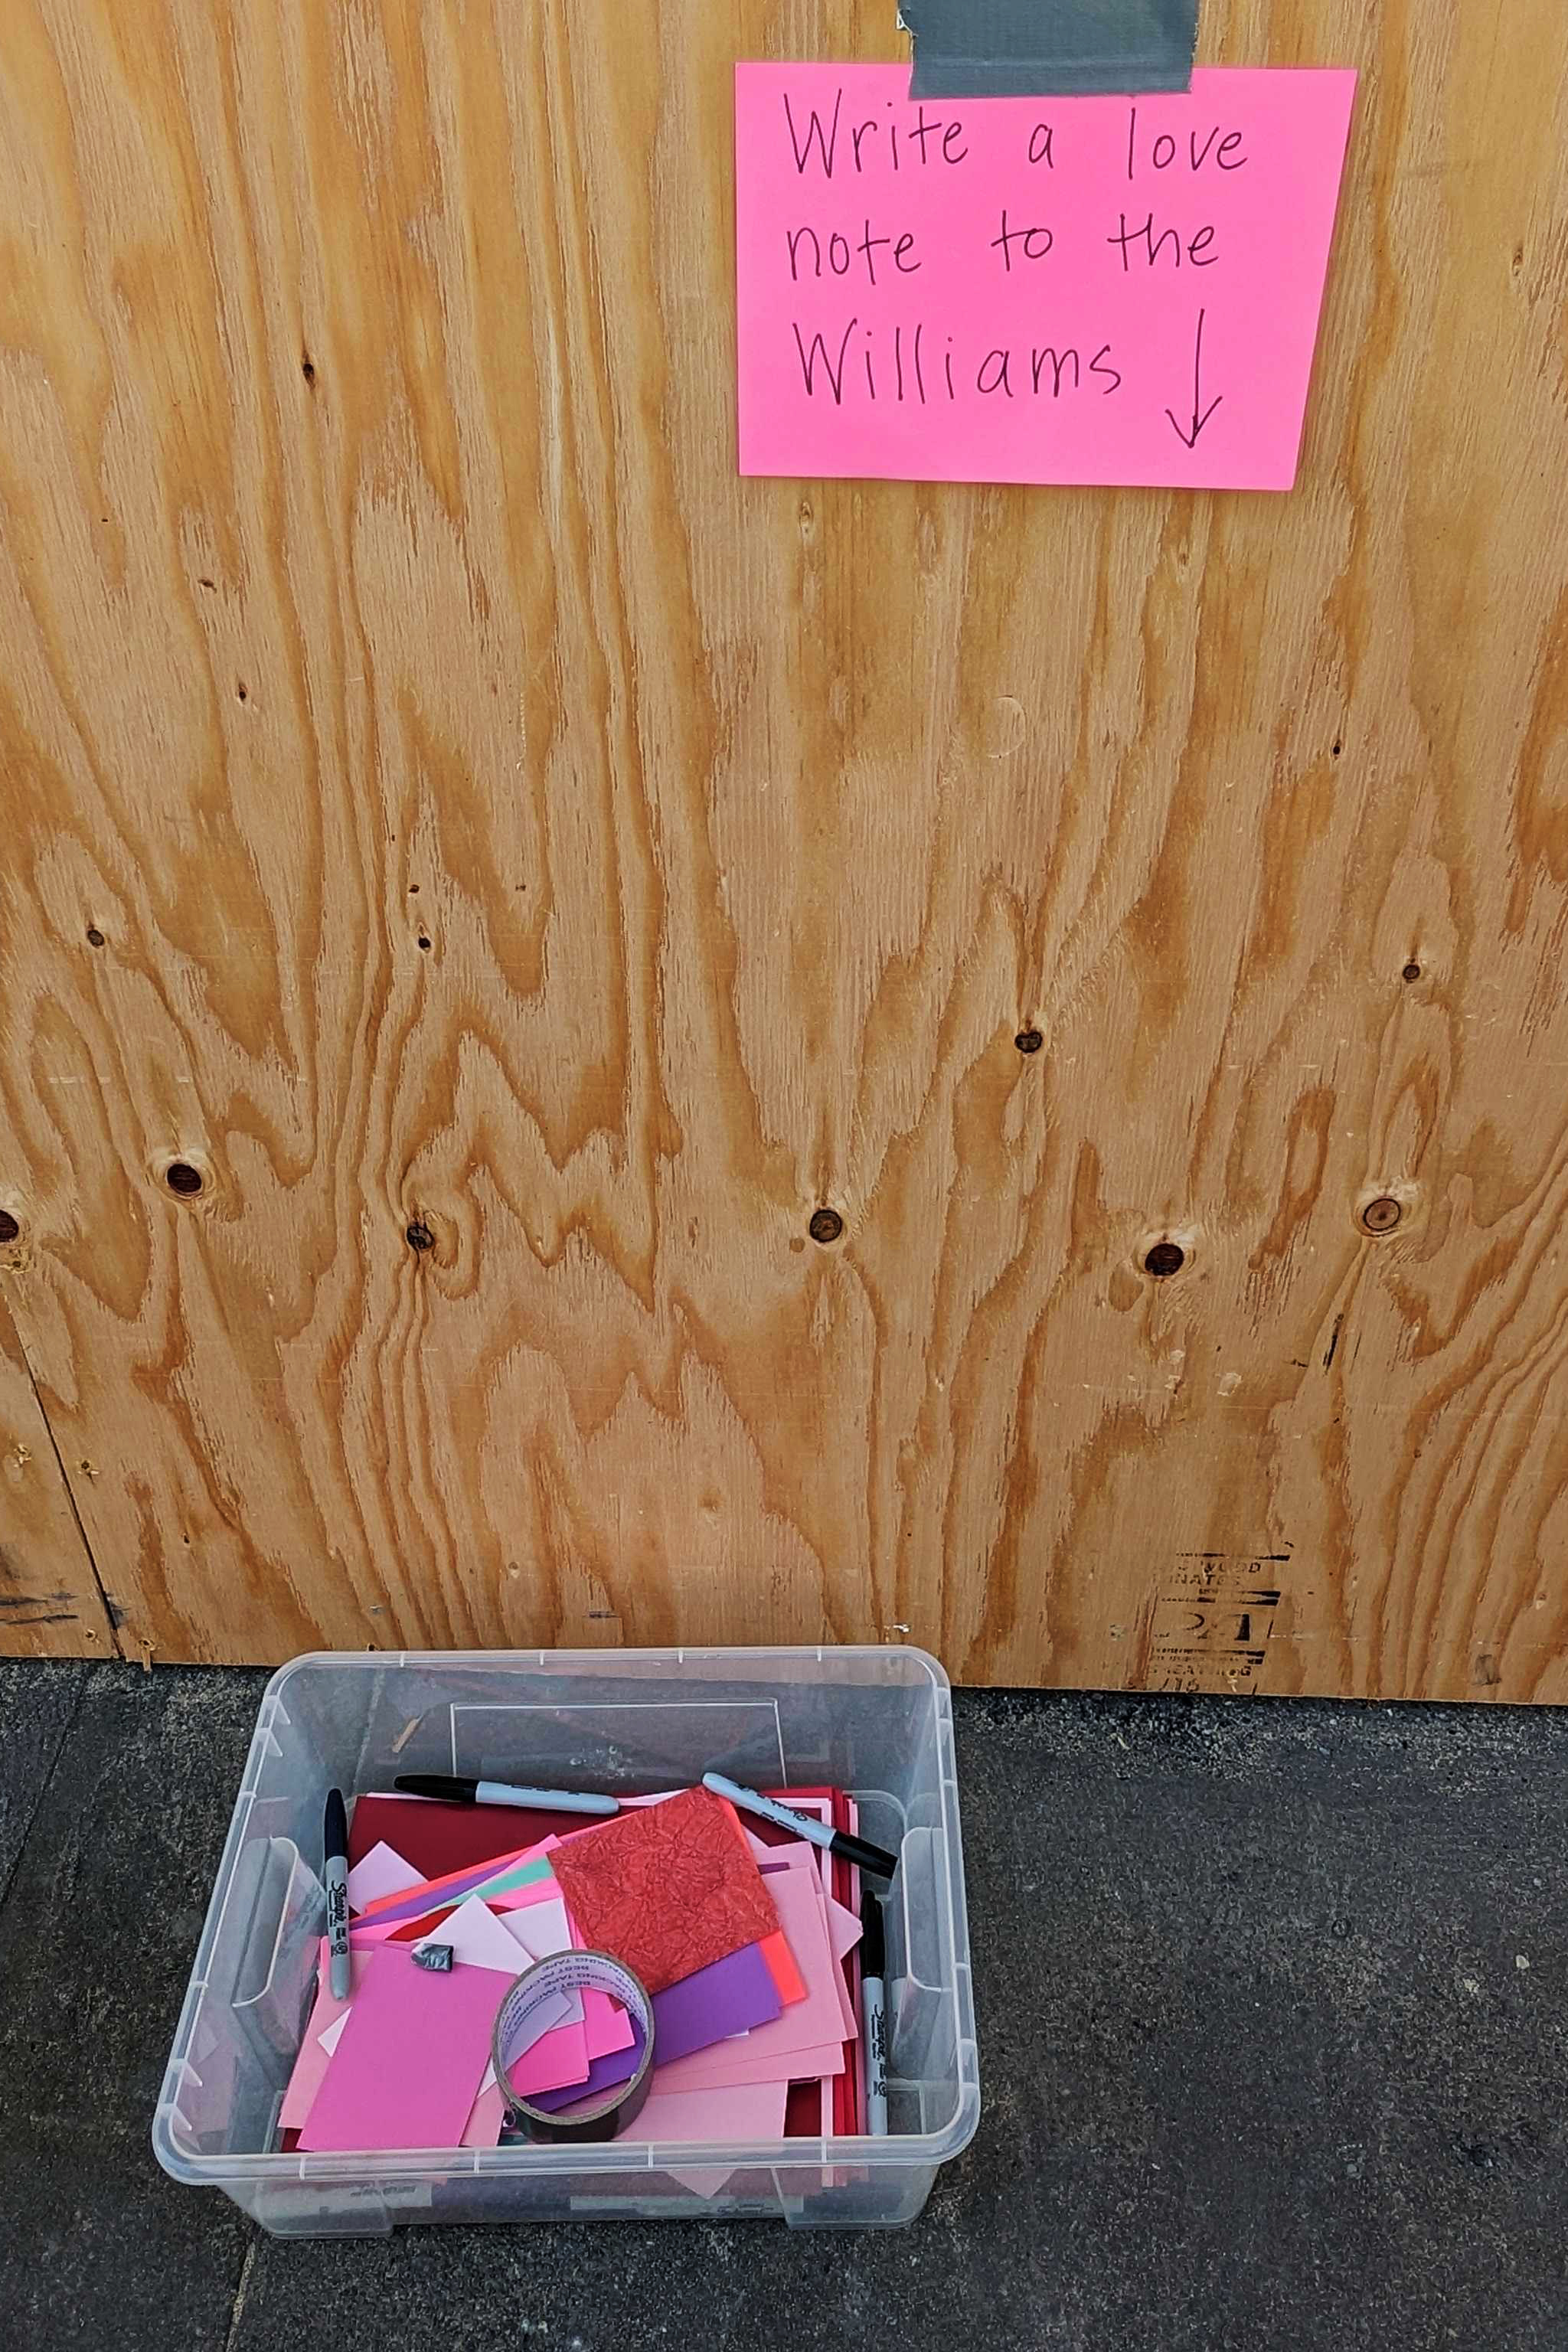 A pink sign on wood reads &quot;Write a love note to the Williams&quot; with an arrow pointing to a bin below, containing markers, tape, and various colored paper.